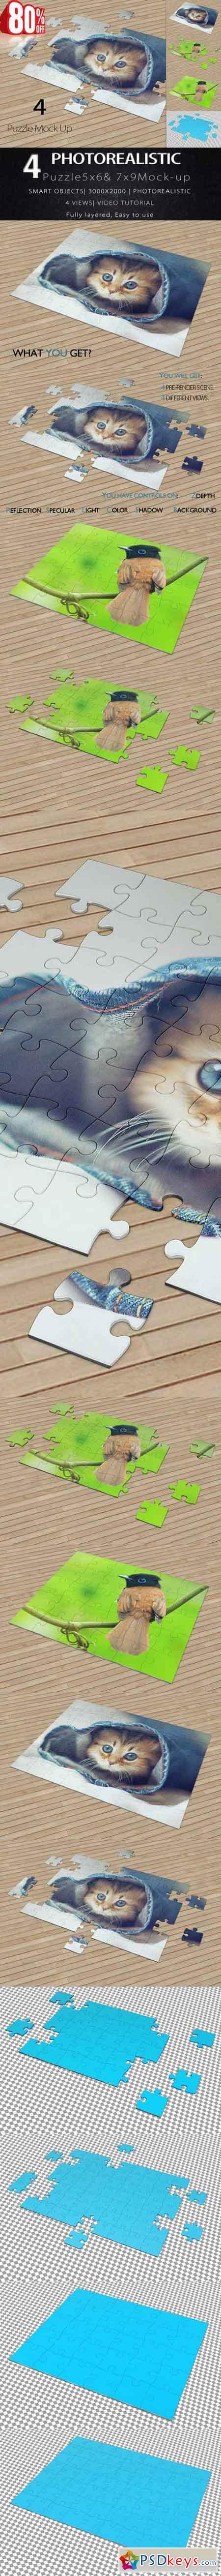 Download Puzzle Mock Up 651962 » Free Download Photoshop Vector Stock image Via Torrent Zippyshare From ...